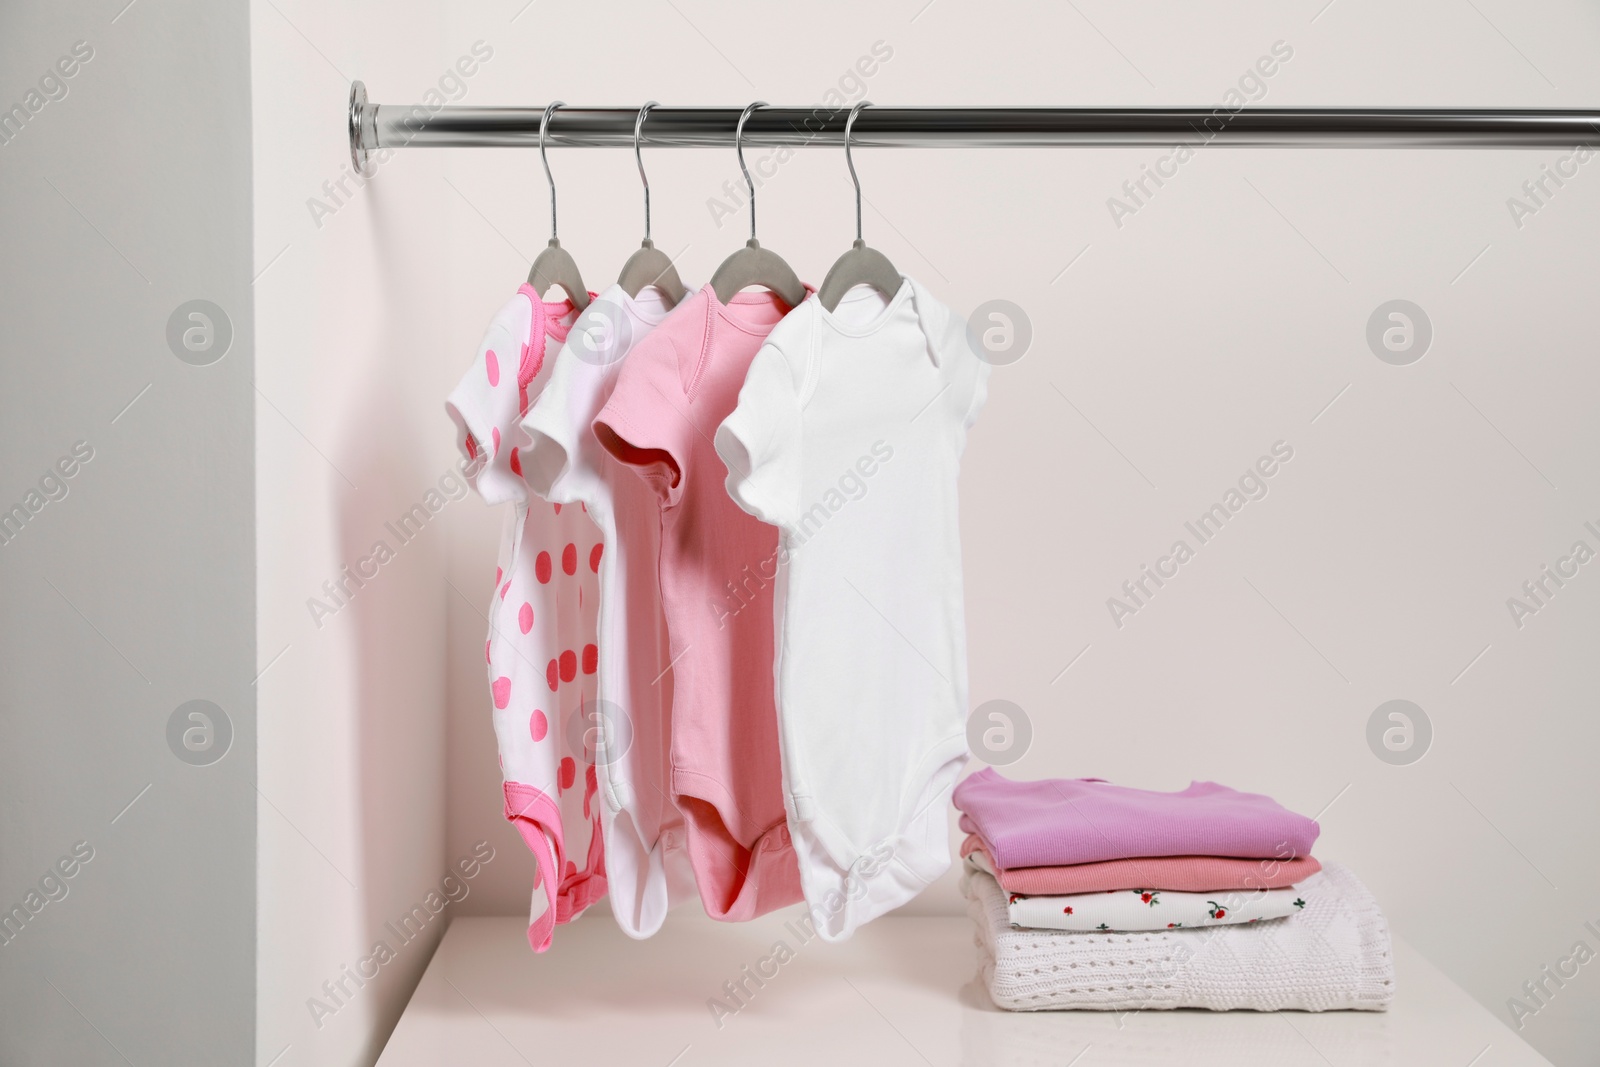 Photo of Hangers with baby bodysuits and stack of clothes near white wall